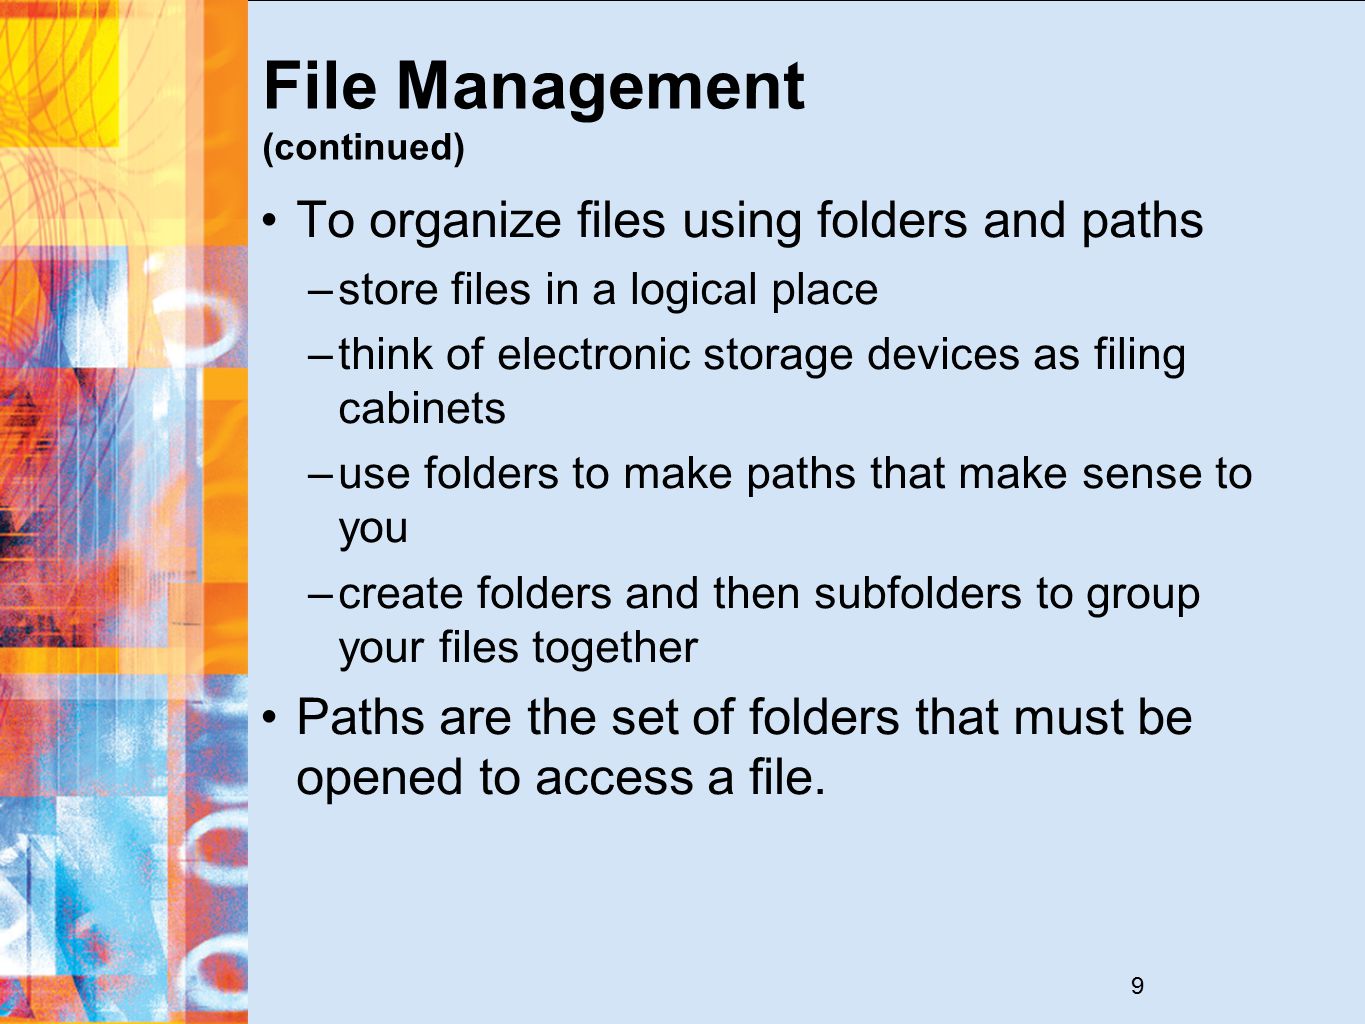 9 File Management (continued) To organize files using folders and paths –store files in a logical place –think of electronic storage devices as filing cabinets –use folders to make paths that make sense to you –create folders and then subfolders to group your files together Paths are the set of folders that must be opened to access a file.